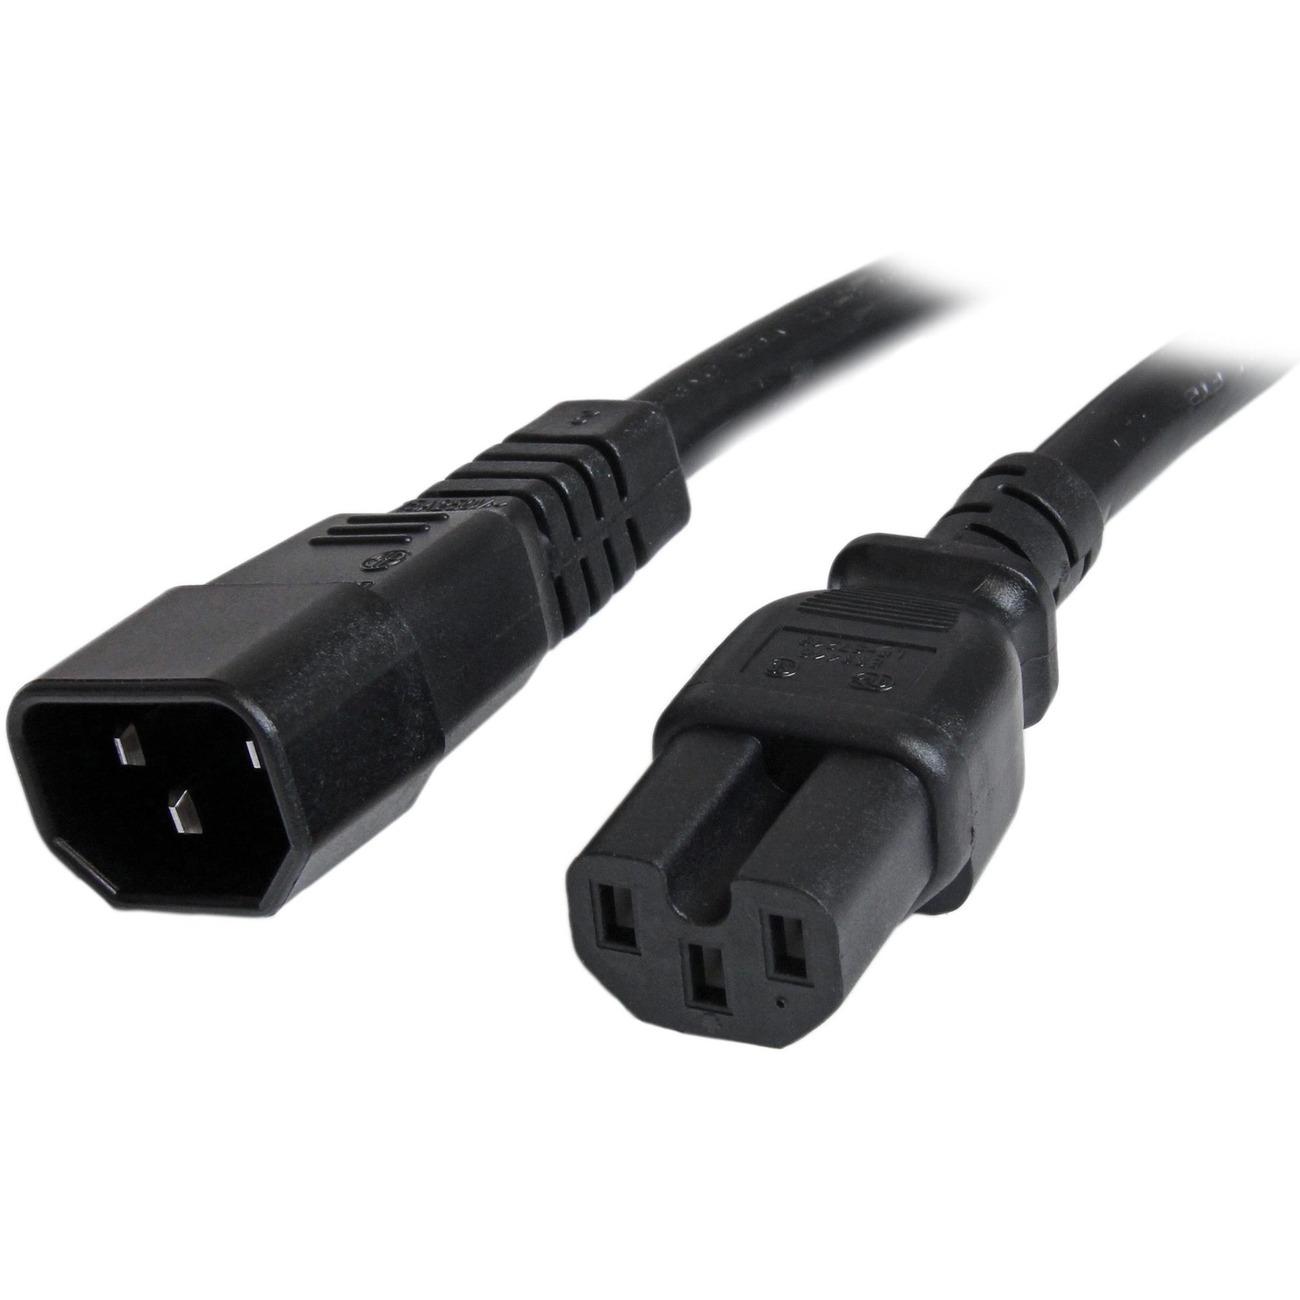 6ft (1.8m) Power Extension Cord, C14 to C13, 10A 125V, 18AWG, Computer  Power Cord Extension, IEC-320-C14 to IEC-320-C13 AC Power Cable Extension  for